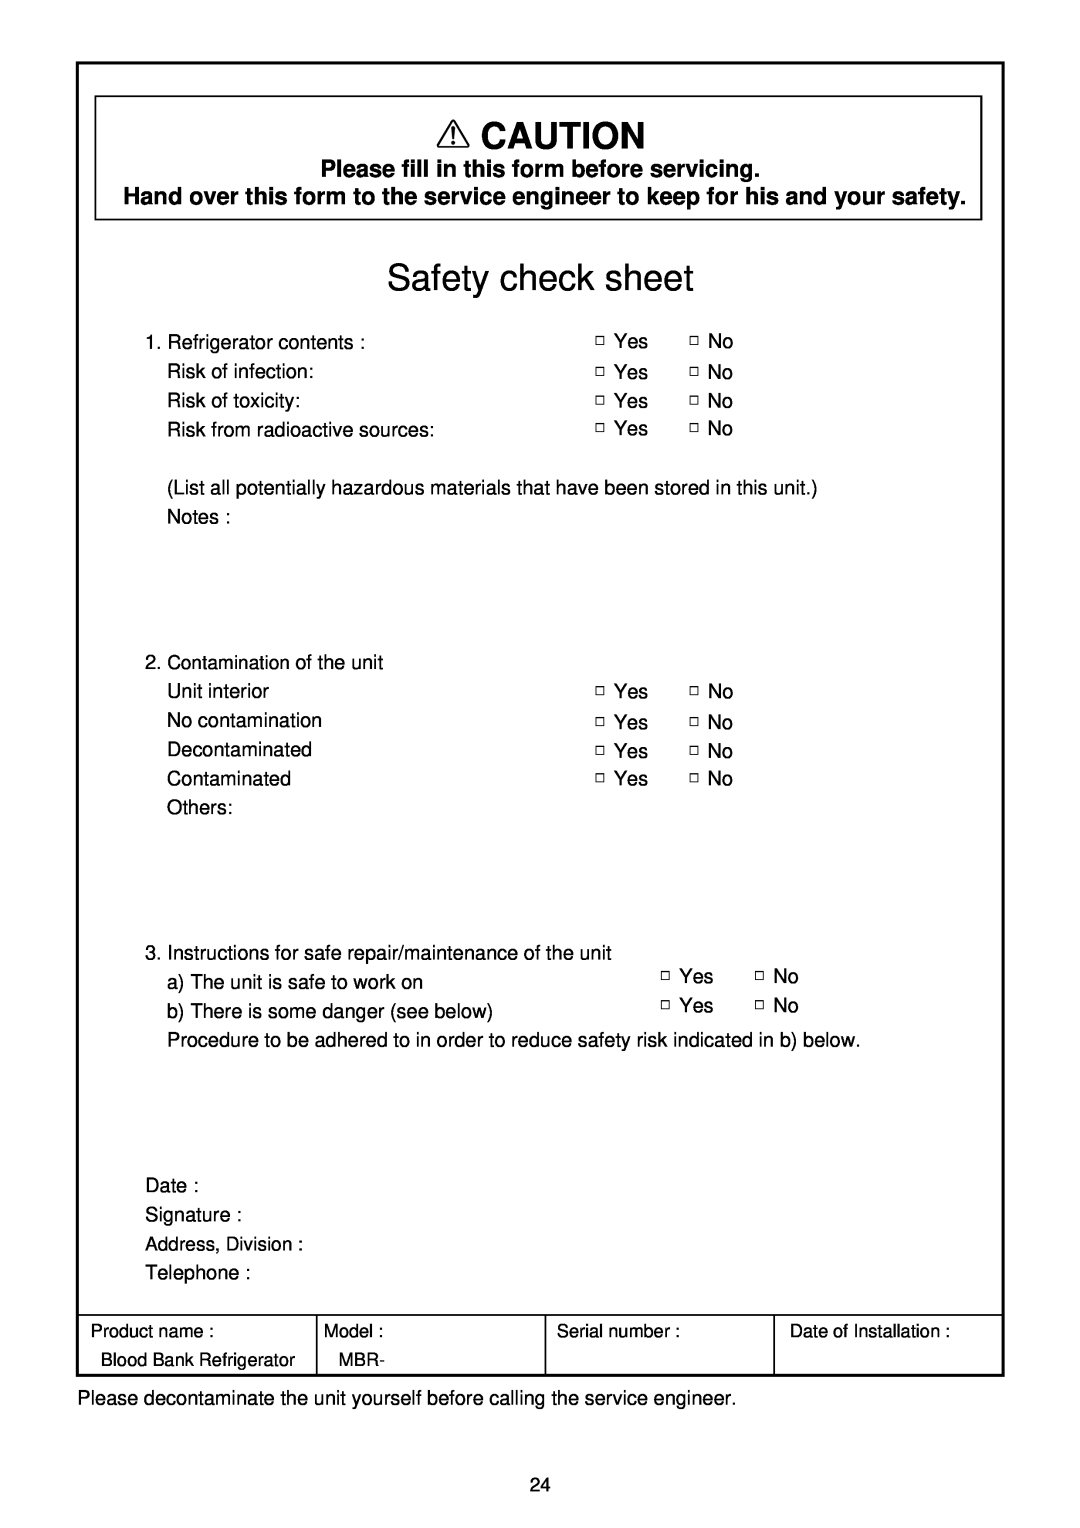 Sanyo MBR-304DR instruction manual Safety check sheet, Please fill in this form before servicing 